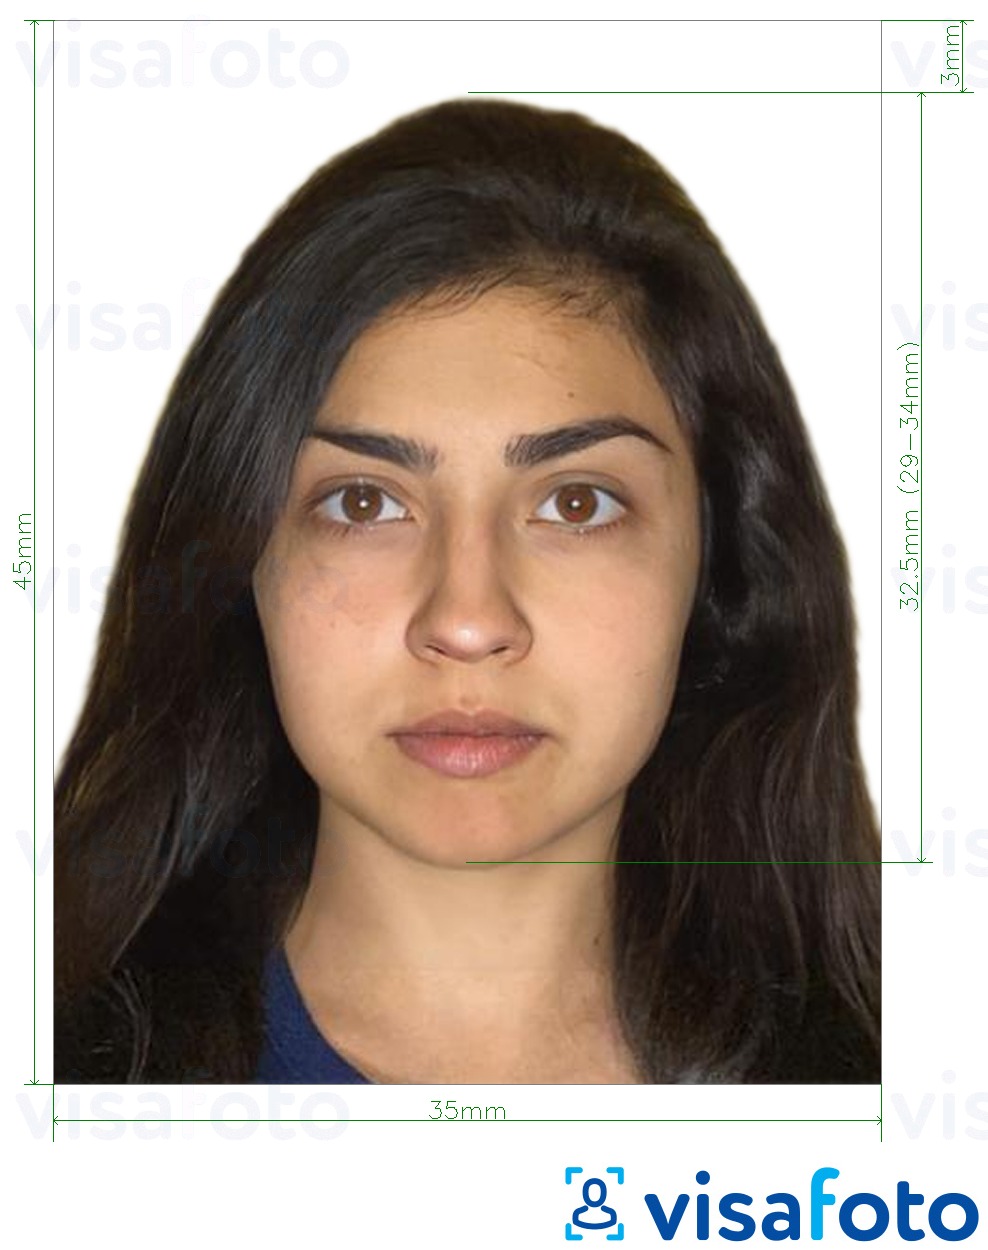 Nepal visa photo 35x45 mm size, tool, requirements